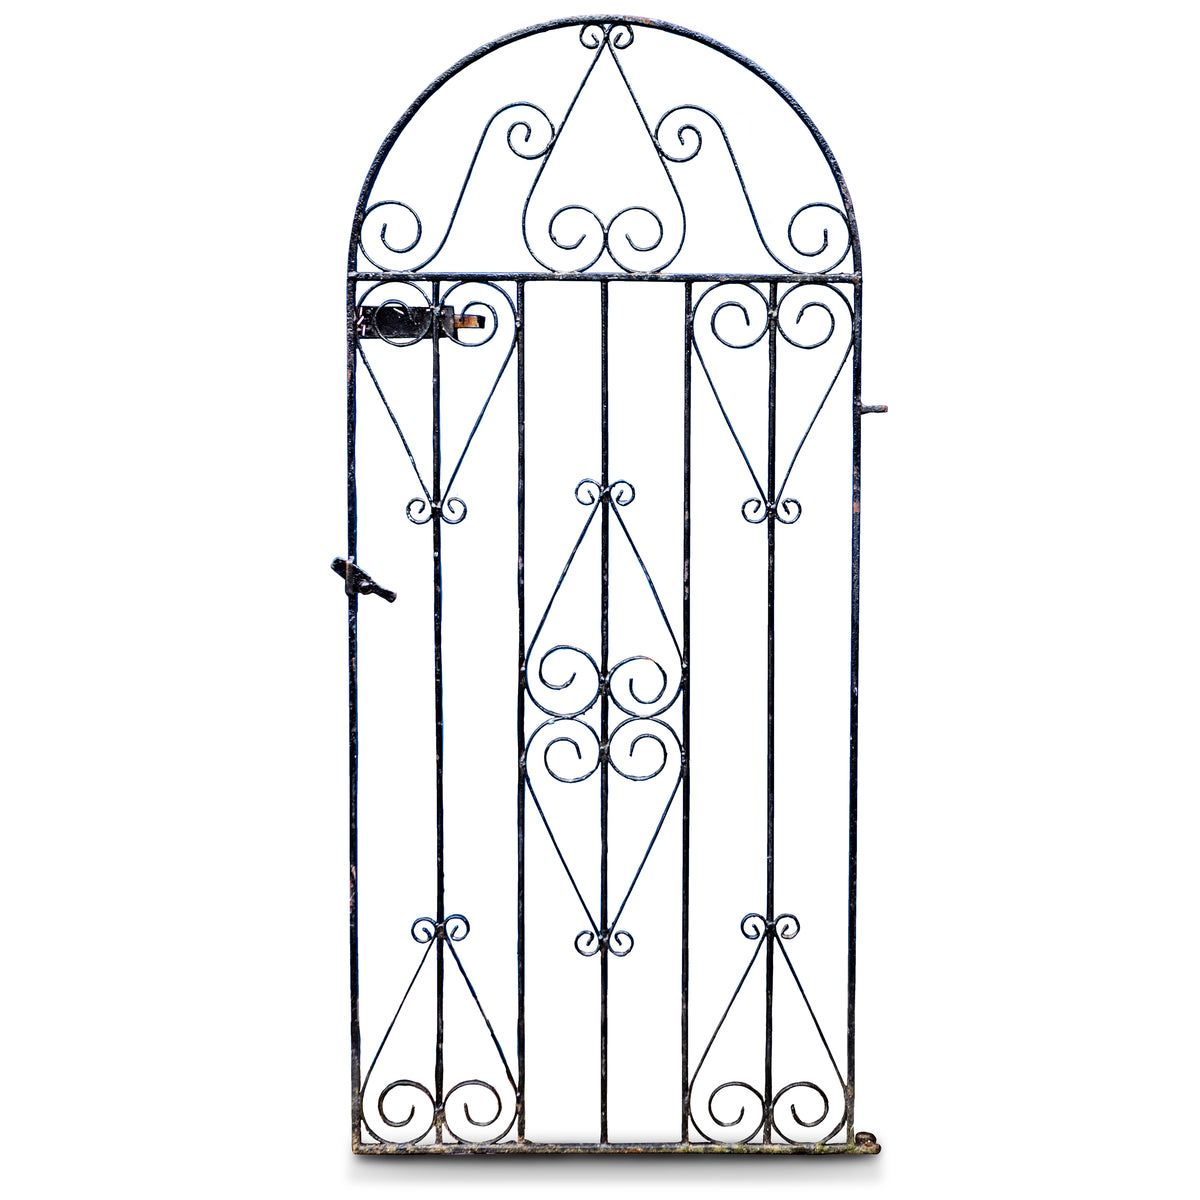 Antique Reclaimed Ornate Wrought Iron Gate | The Architectural Forum